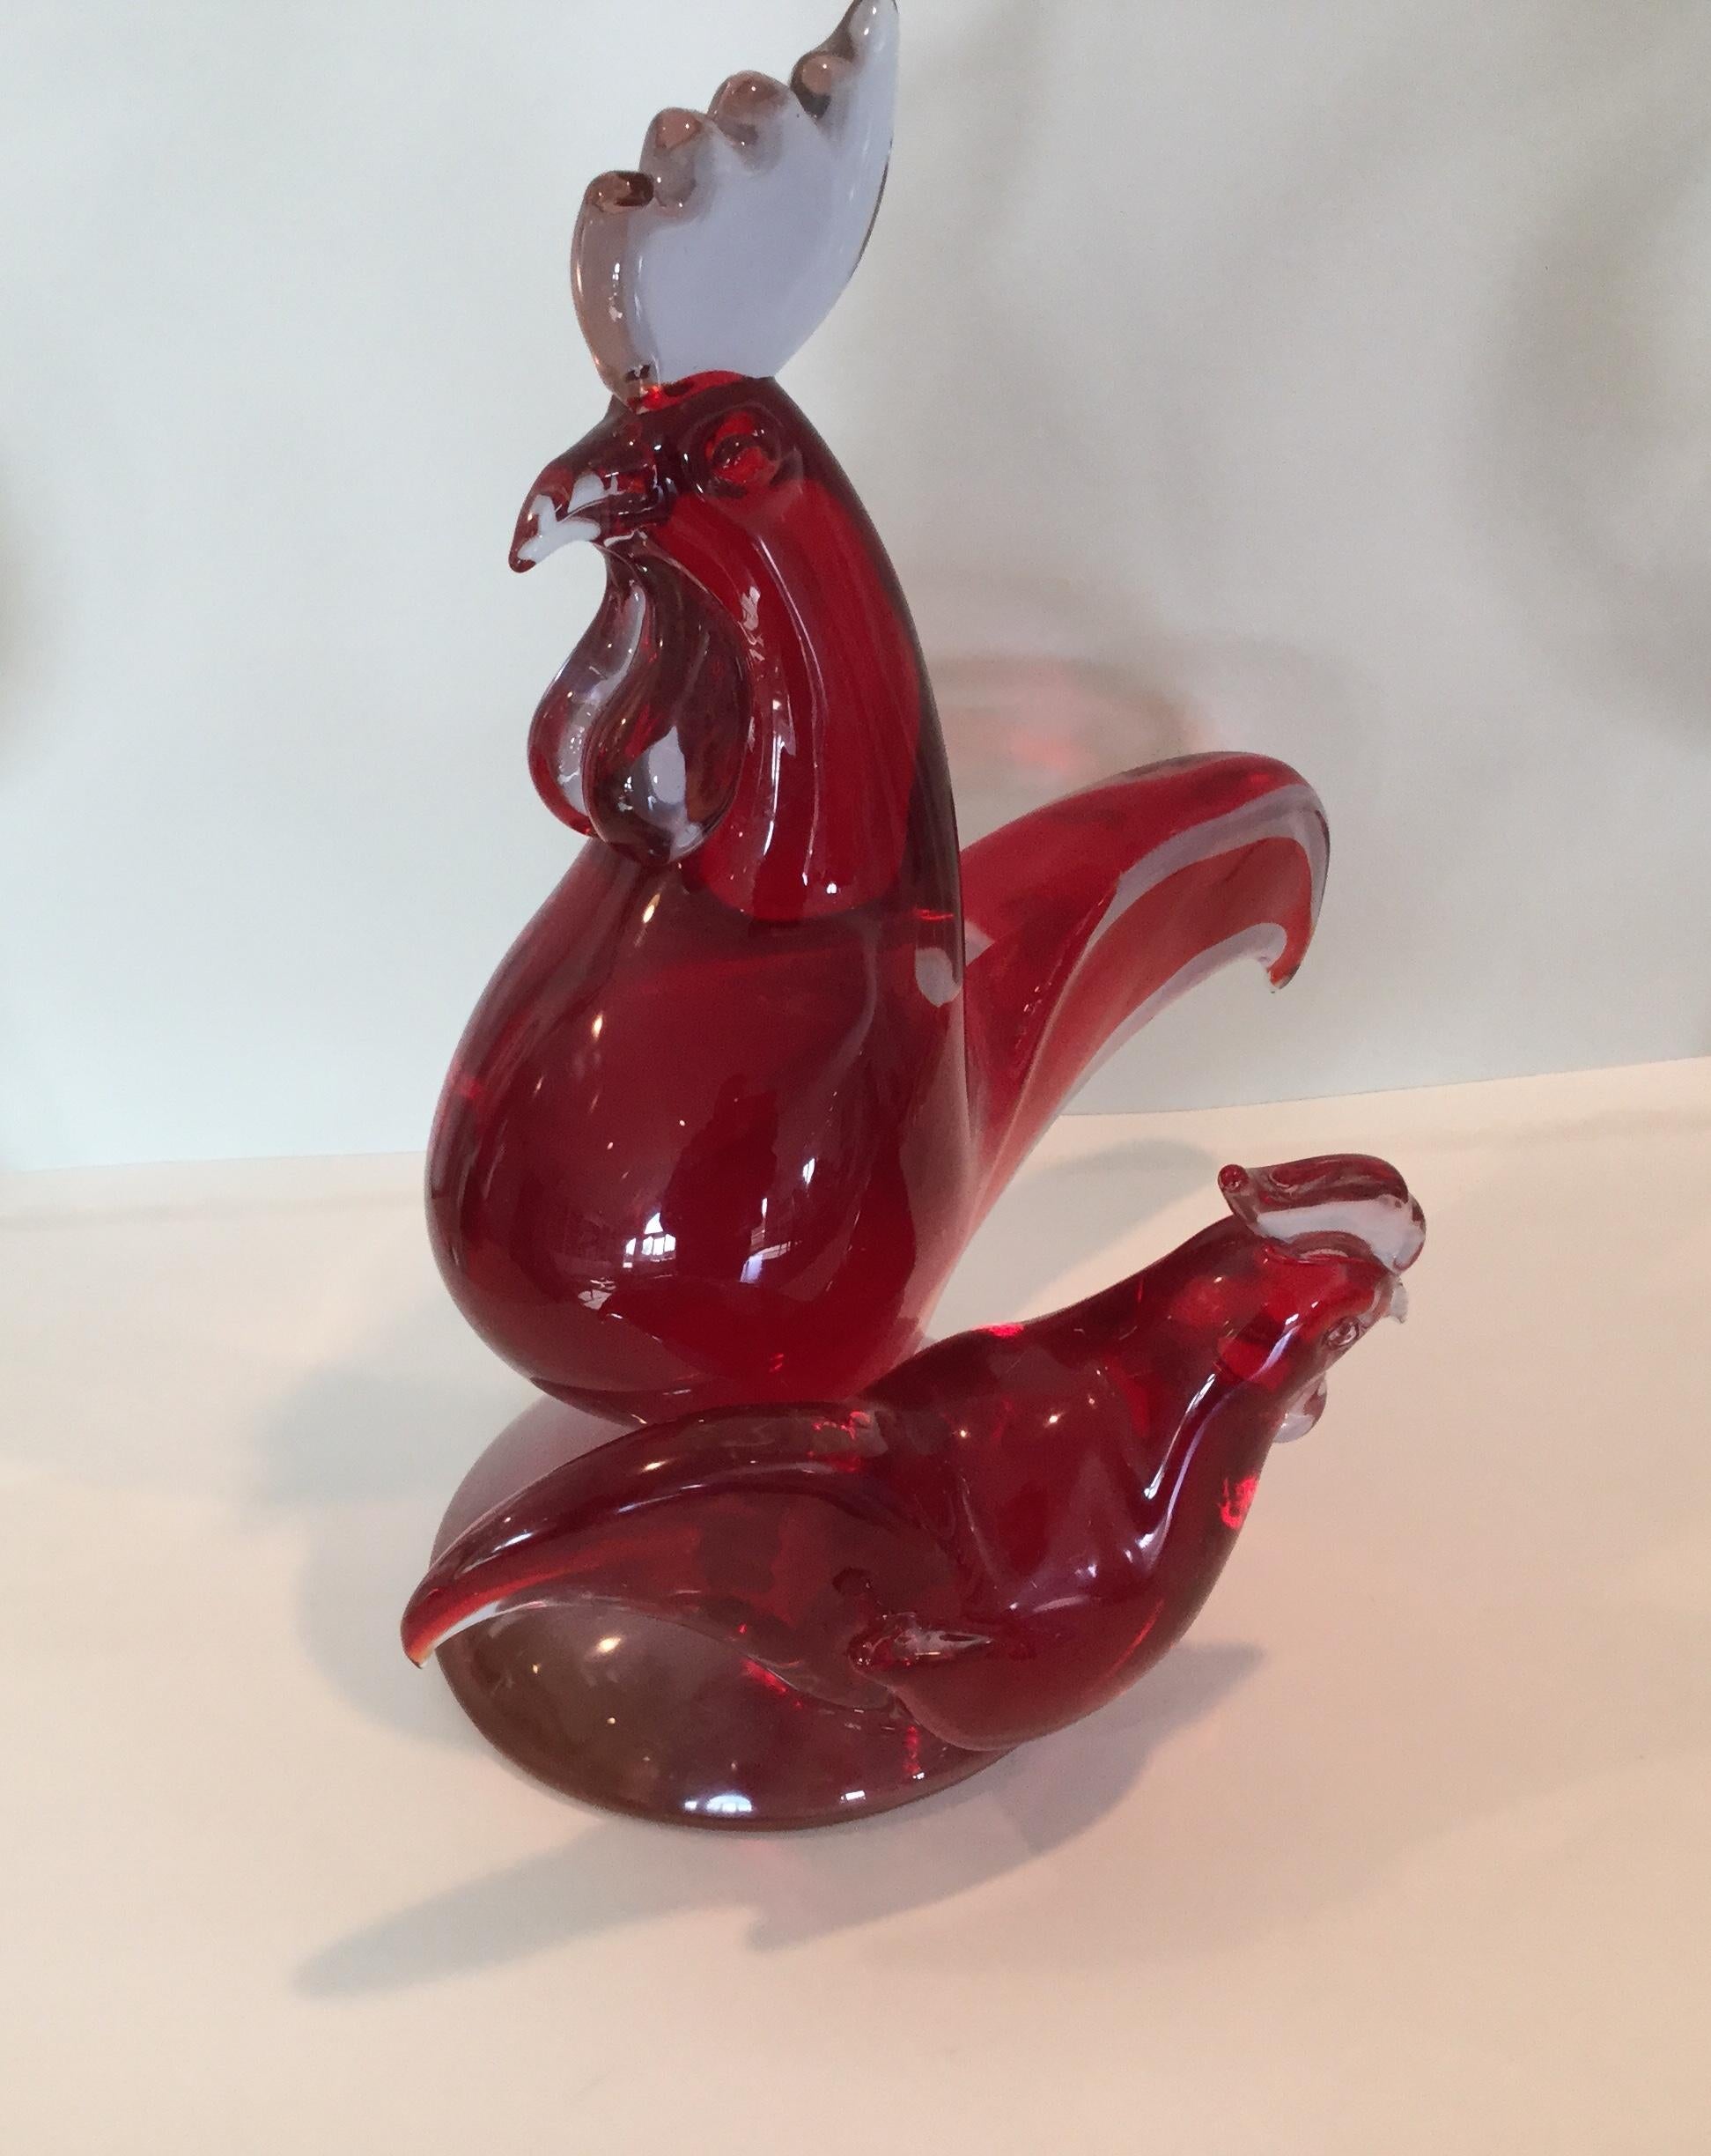 Monumental Murano Double Rooster Sculpture by Cenedese in Alexandrite and Red In Good Condition For Sale In Keego Harbor, MI